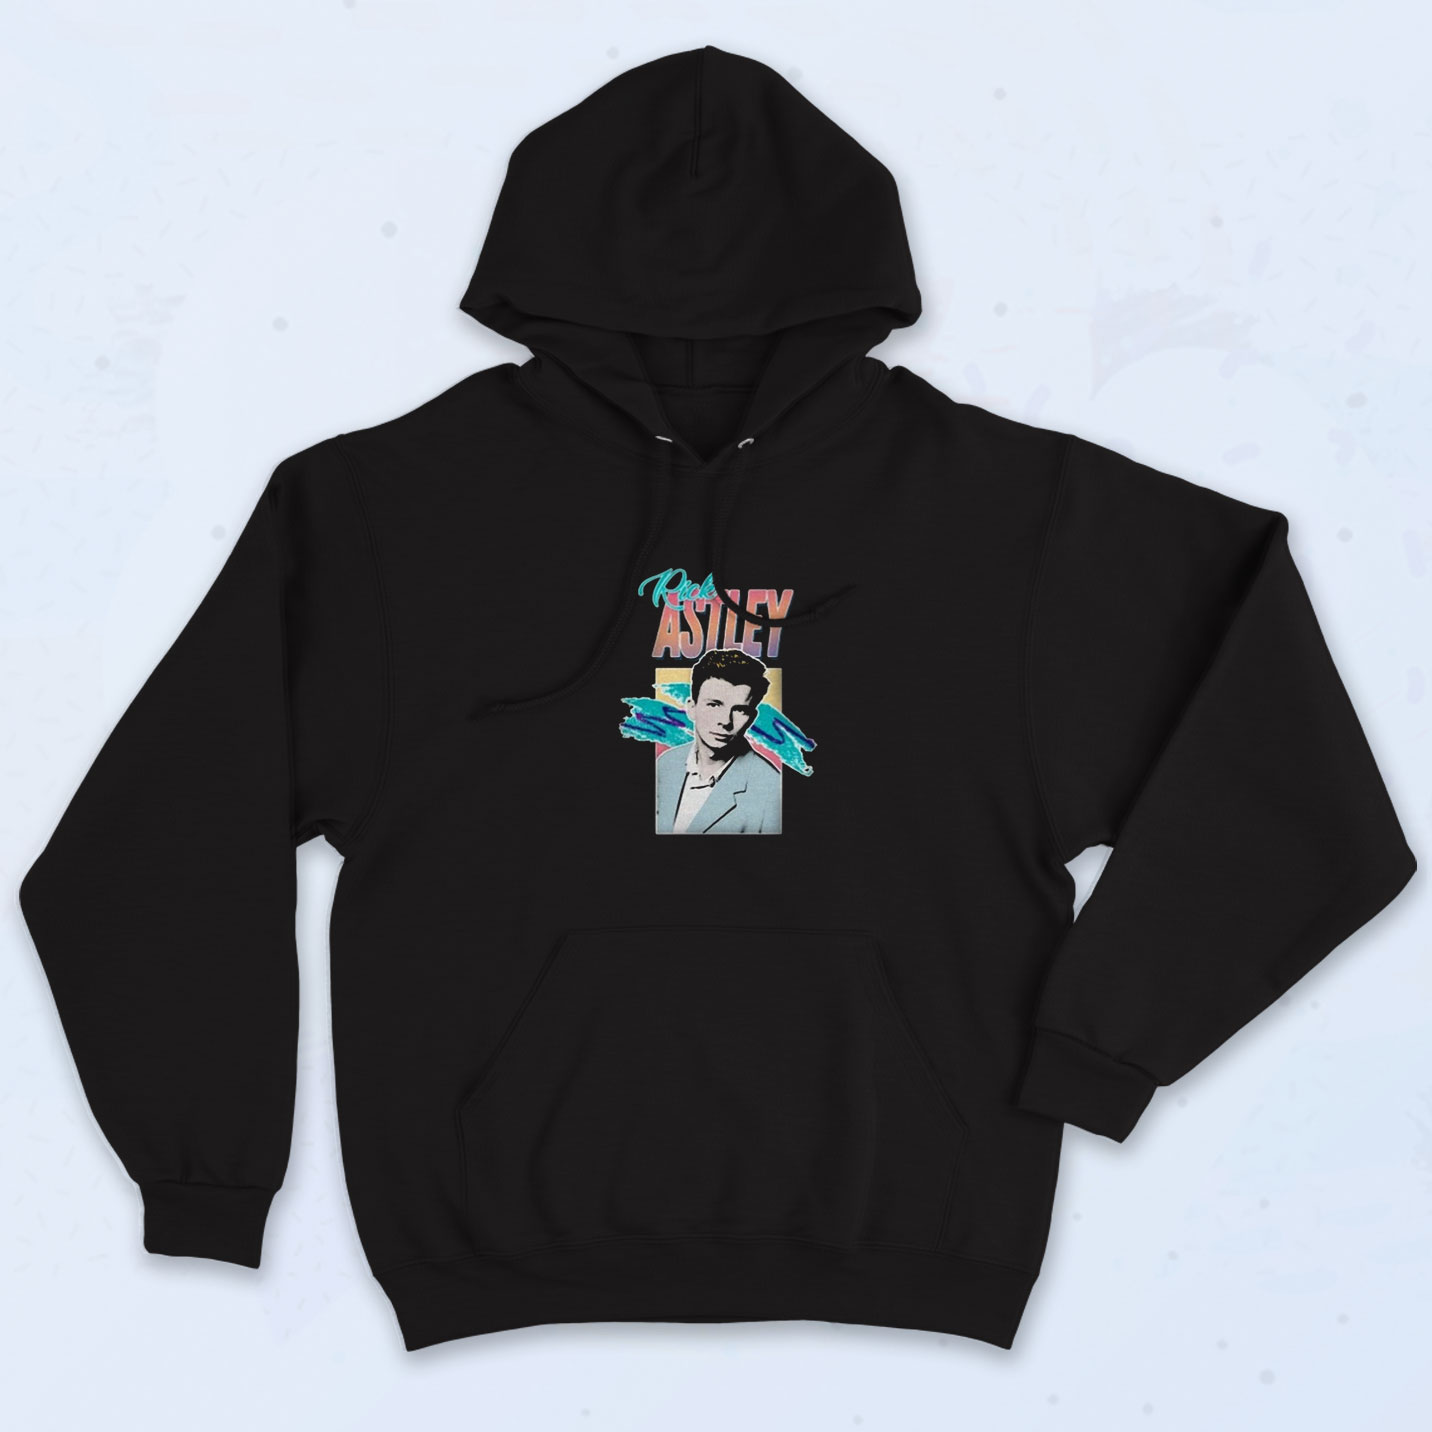 Rick Astley 80s Hoodie On Sale - 90sclothes.com